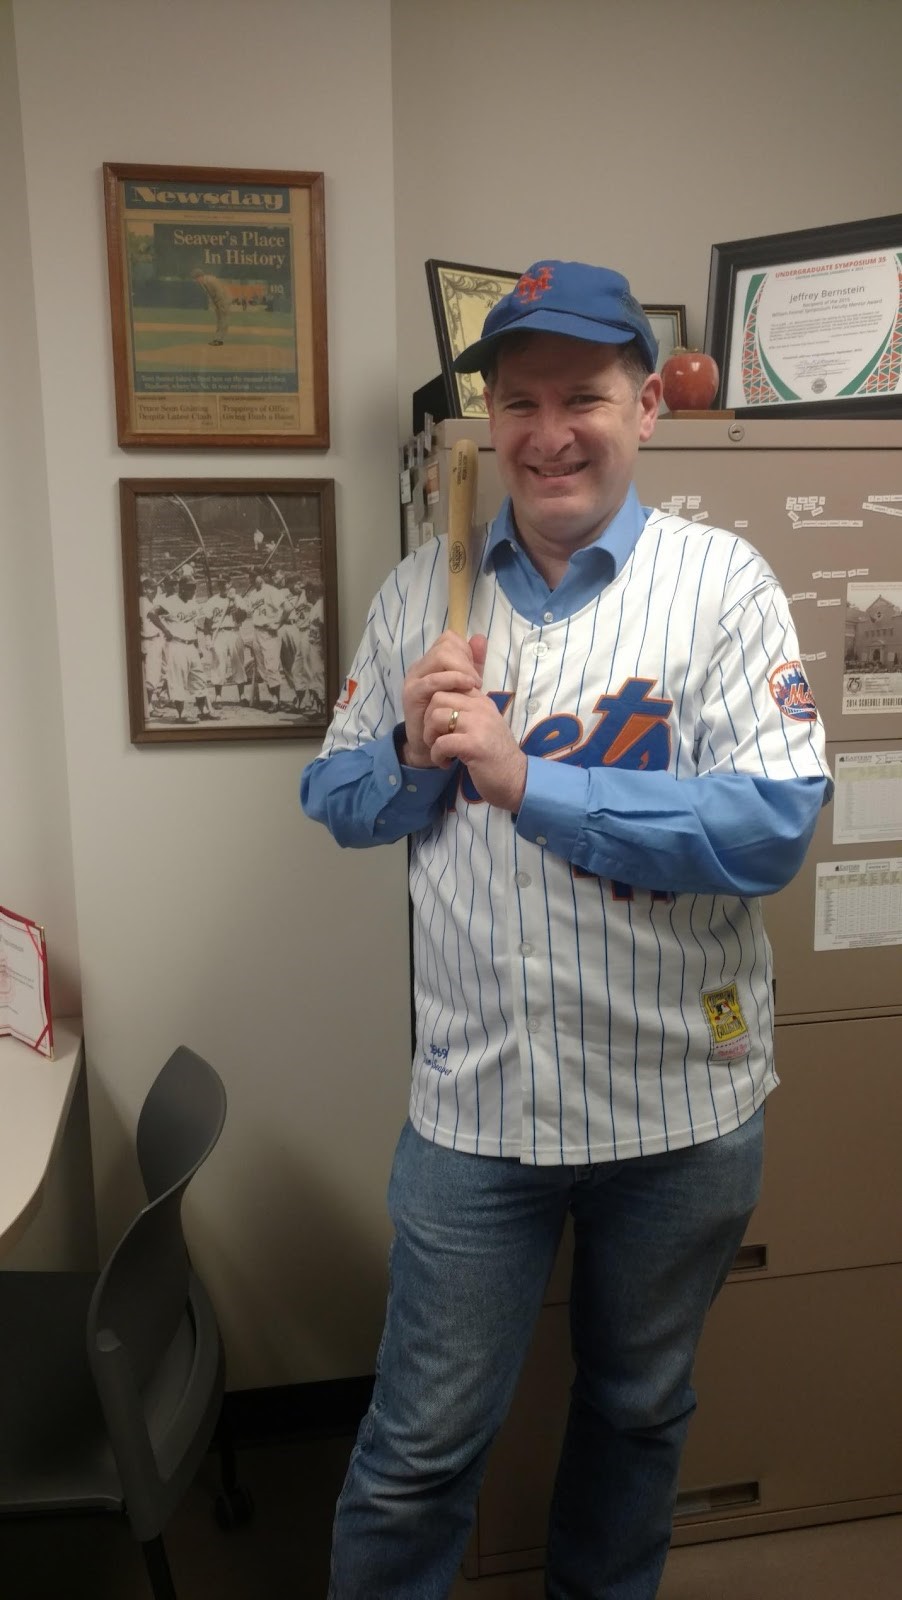 Image of Jeff Bernstein dressed in Met's gear and holding a baseball bat. 